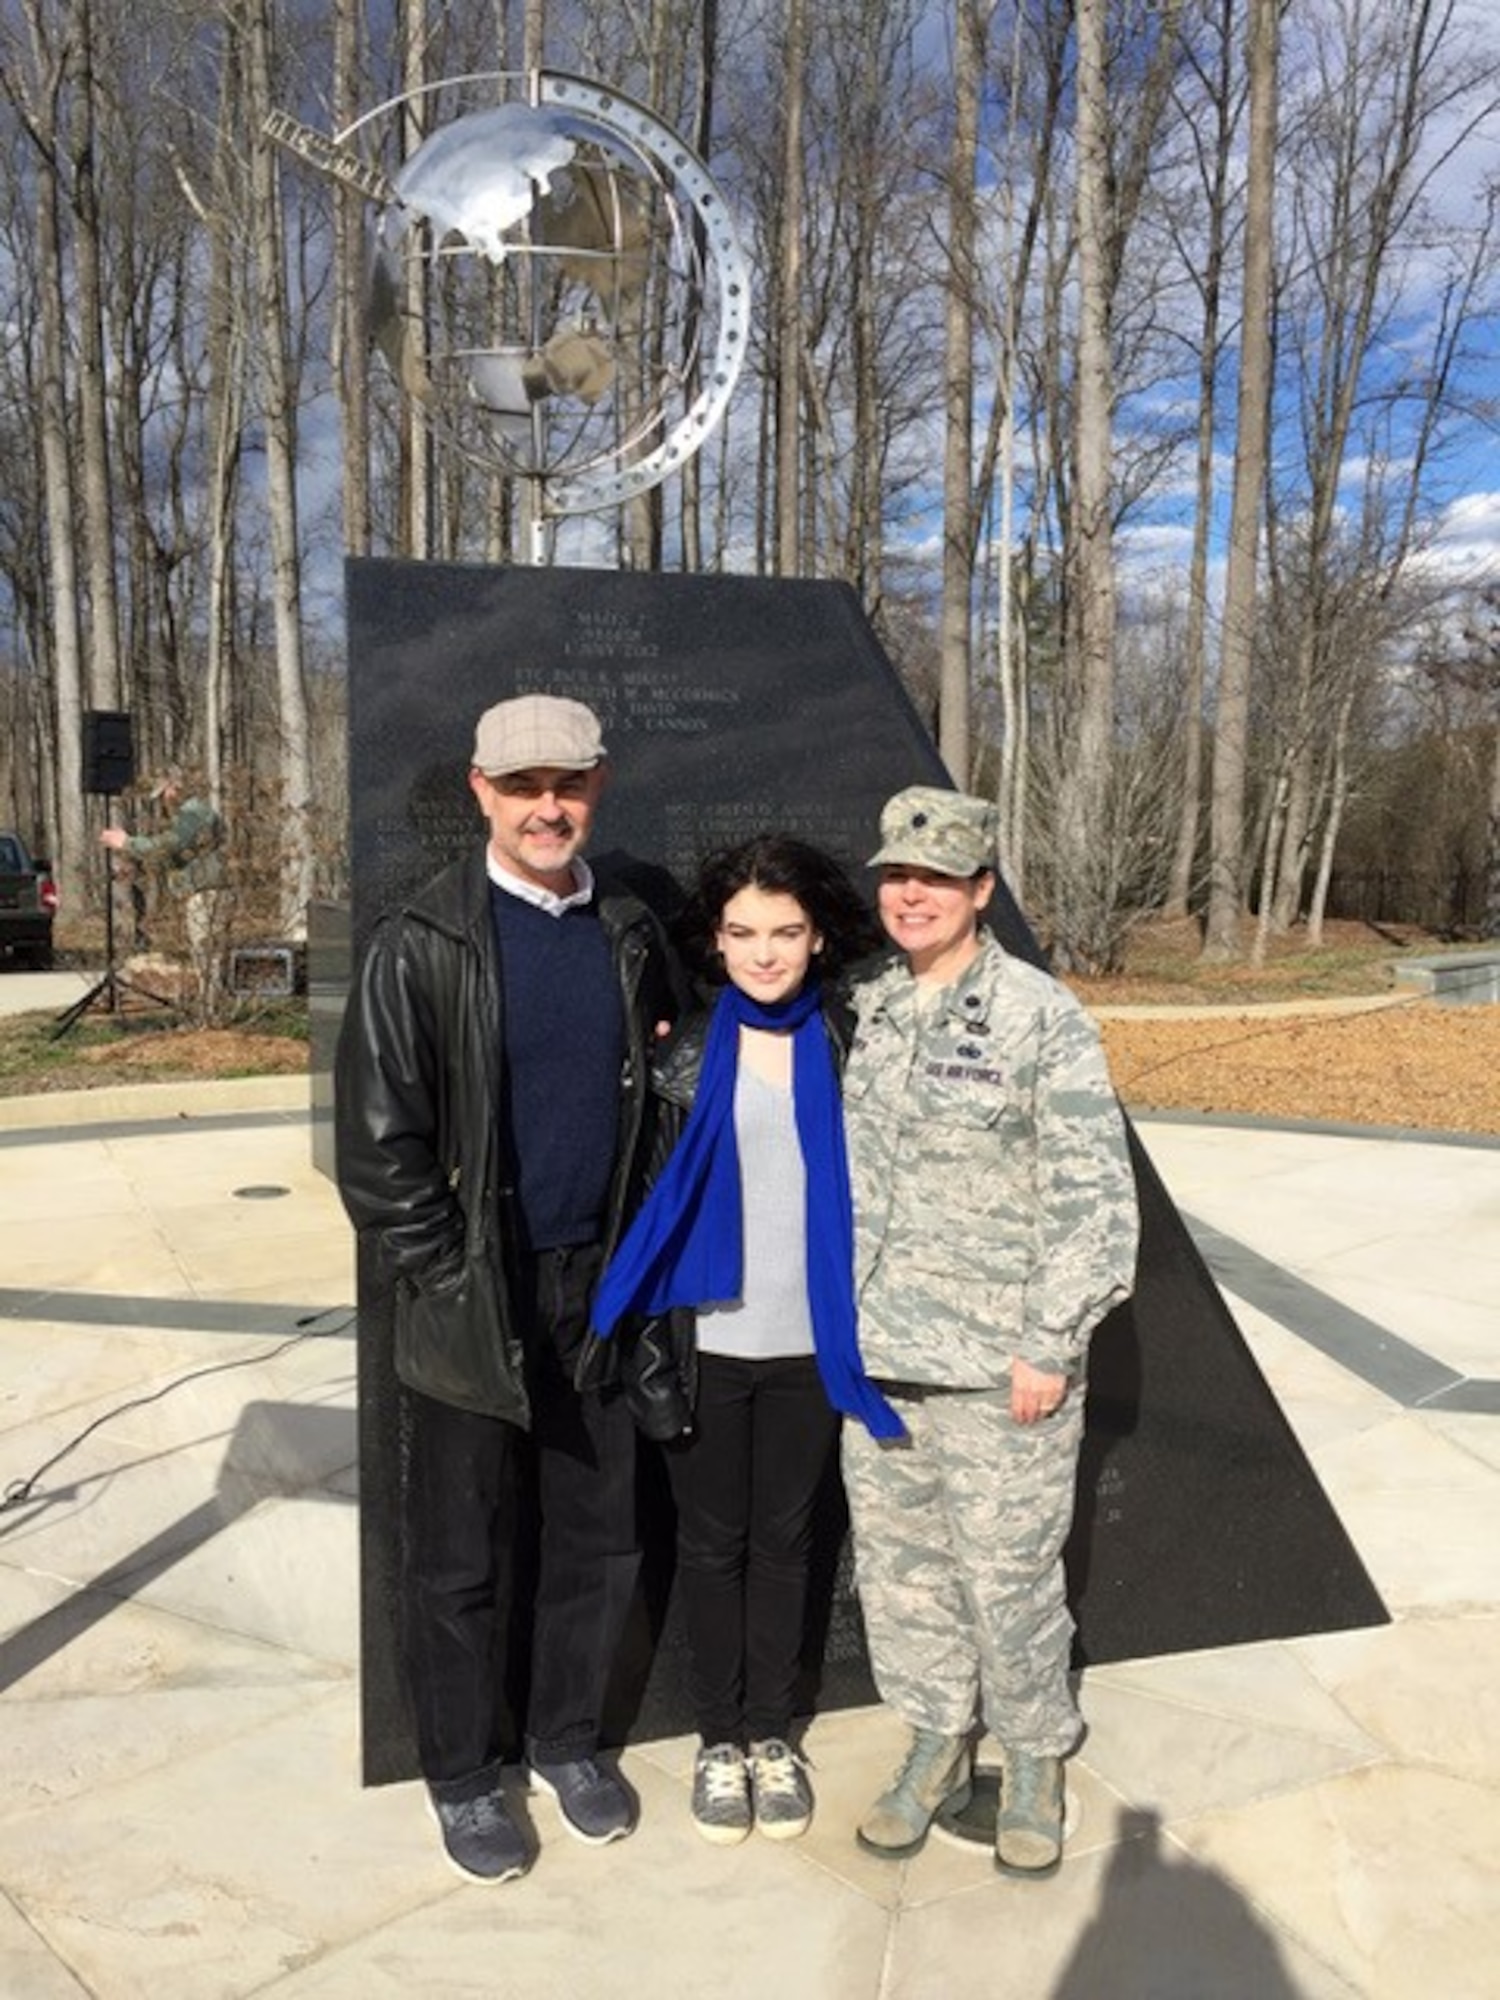 The new vice commander of the 145th Airlift Wing poses for a photo with her family, in front of the memorial site on base.